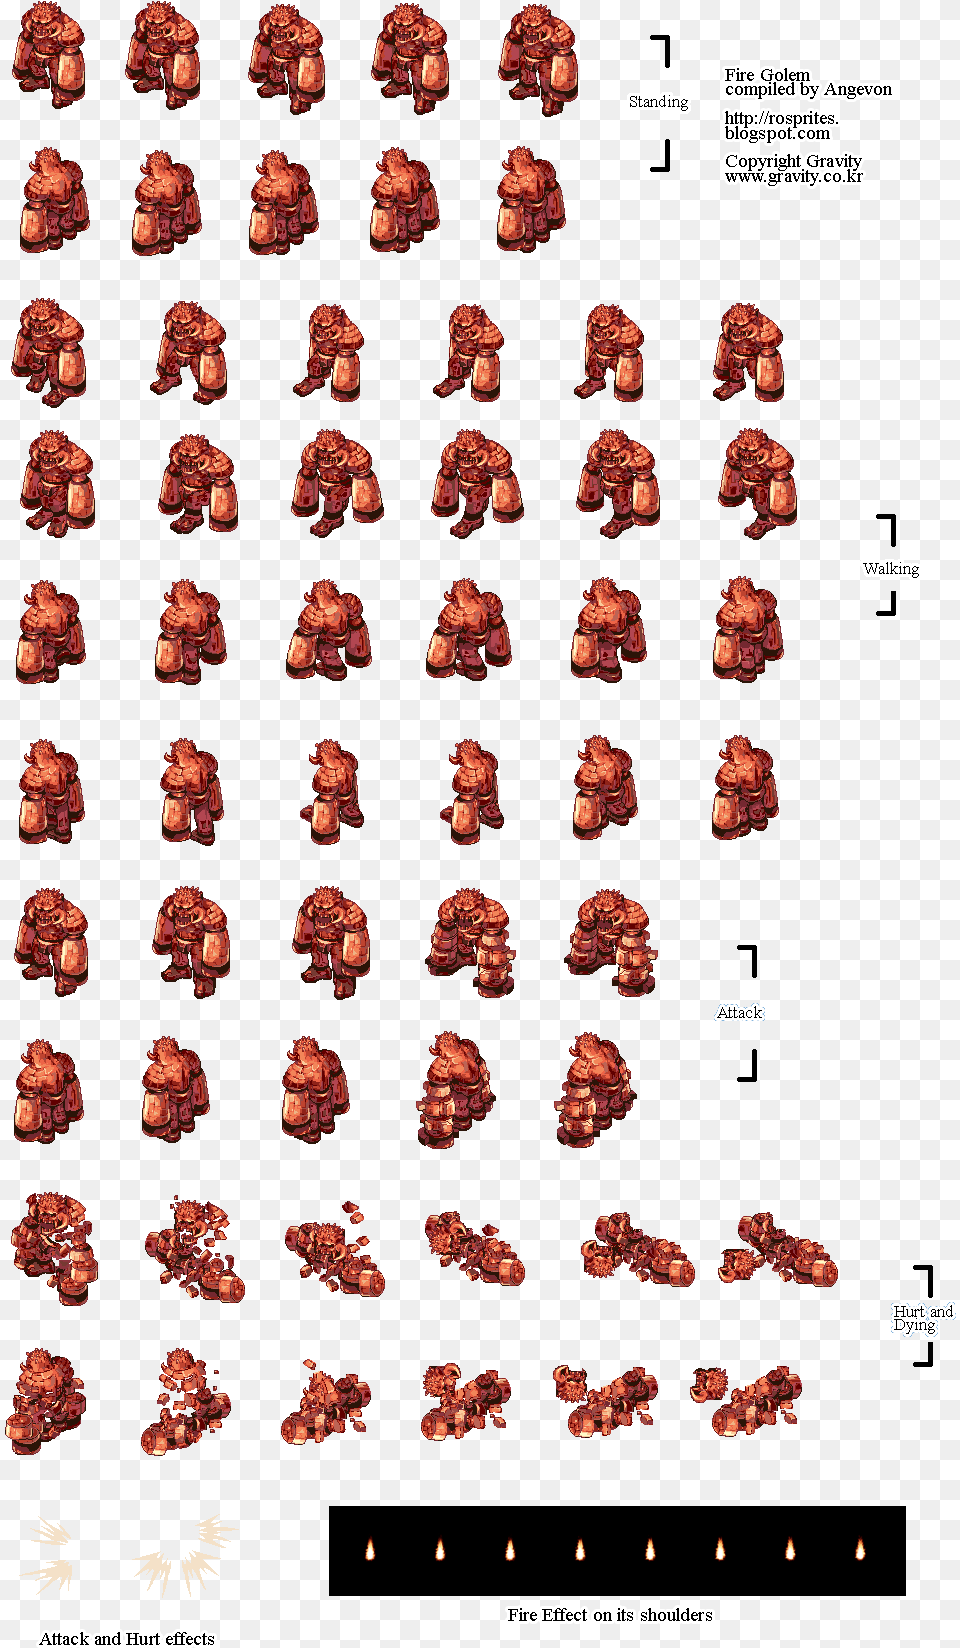 Fire Monster Sprite Sheet Download Fire Monster Sprite Sheet, Person Png Image